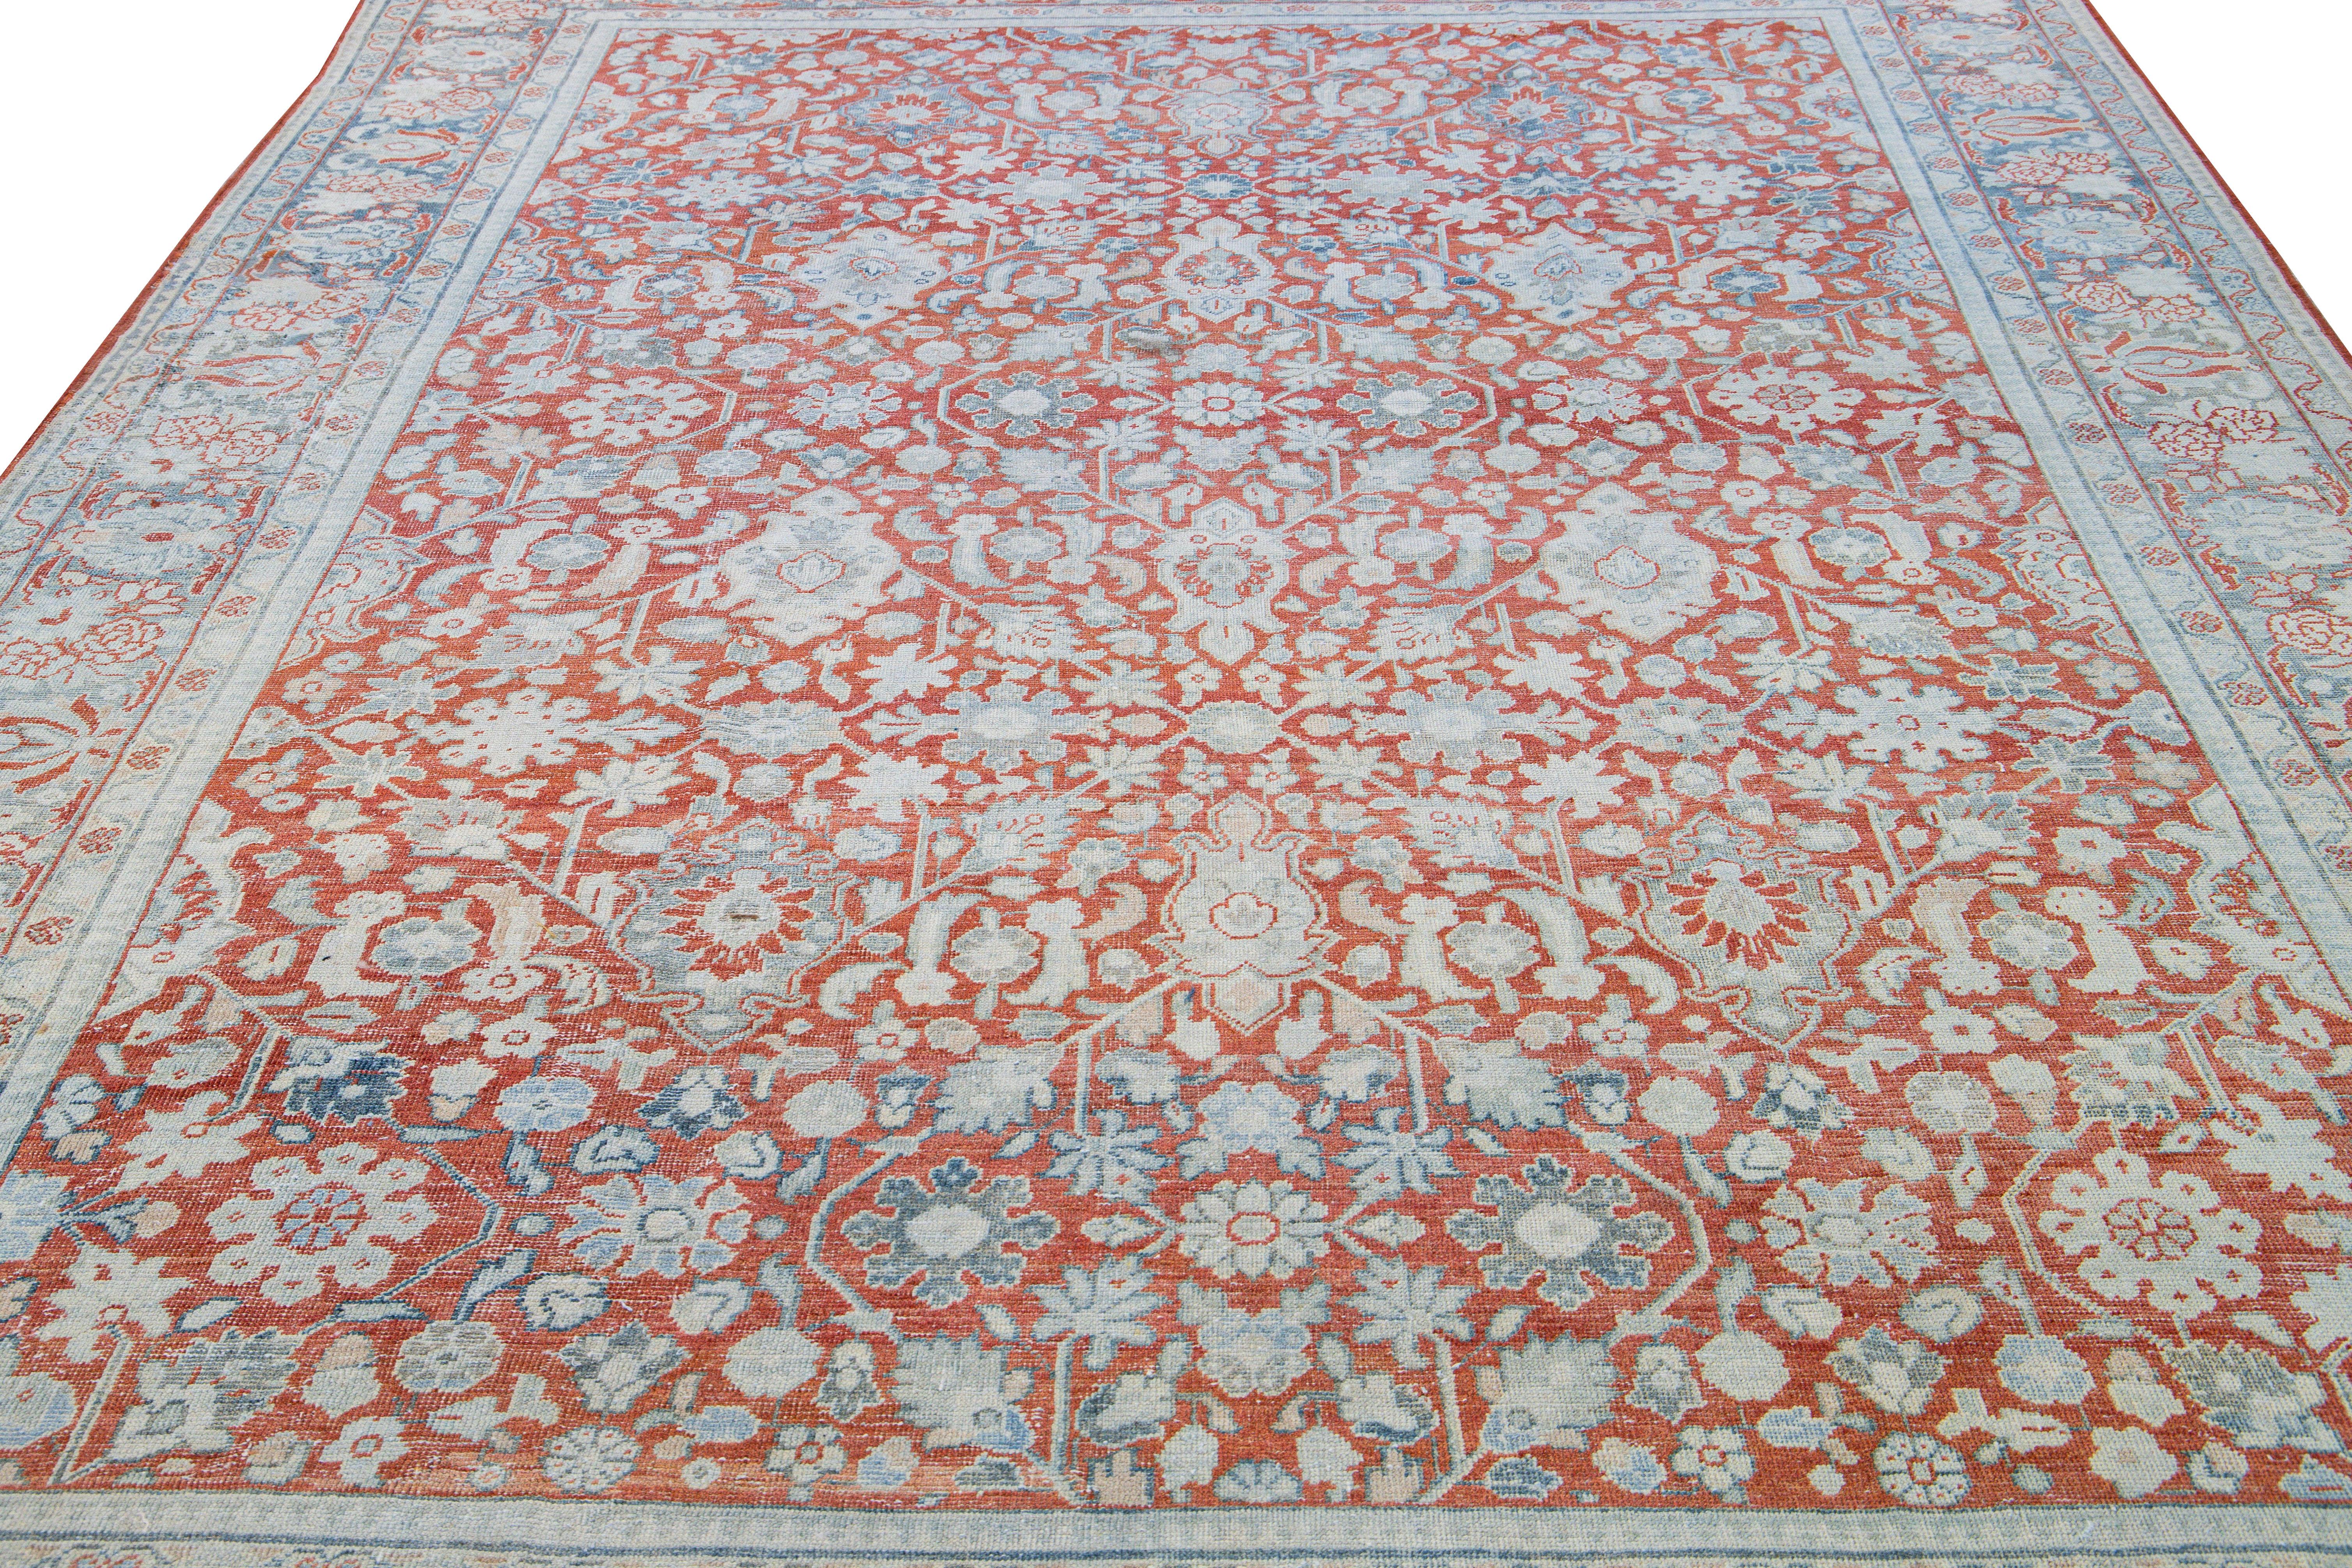 Islamic Antique Mahal Handmade Floral Motif Red Wool Rug For Sale